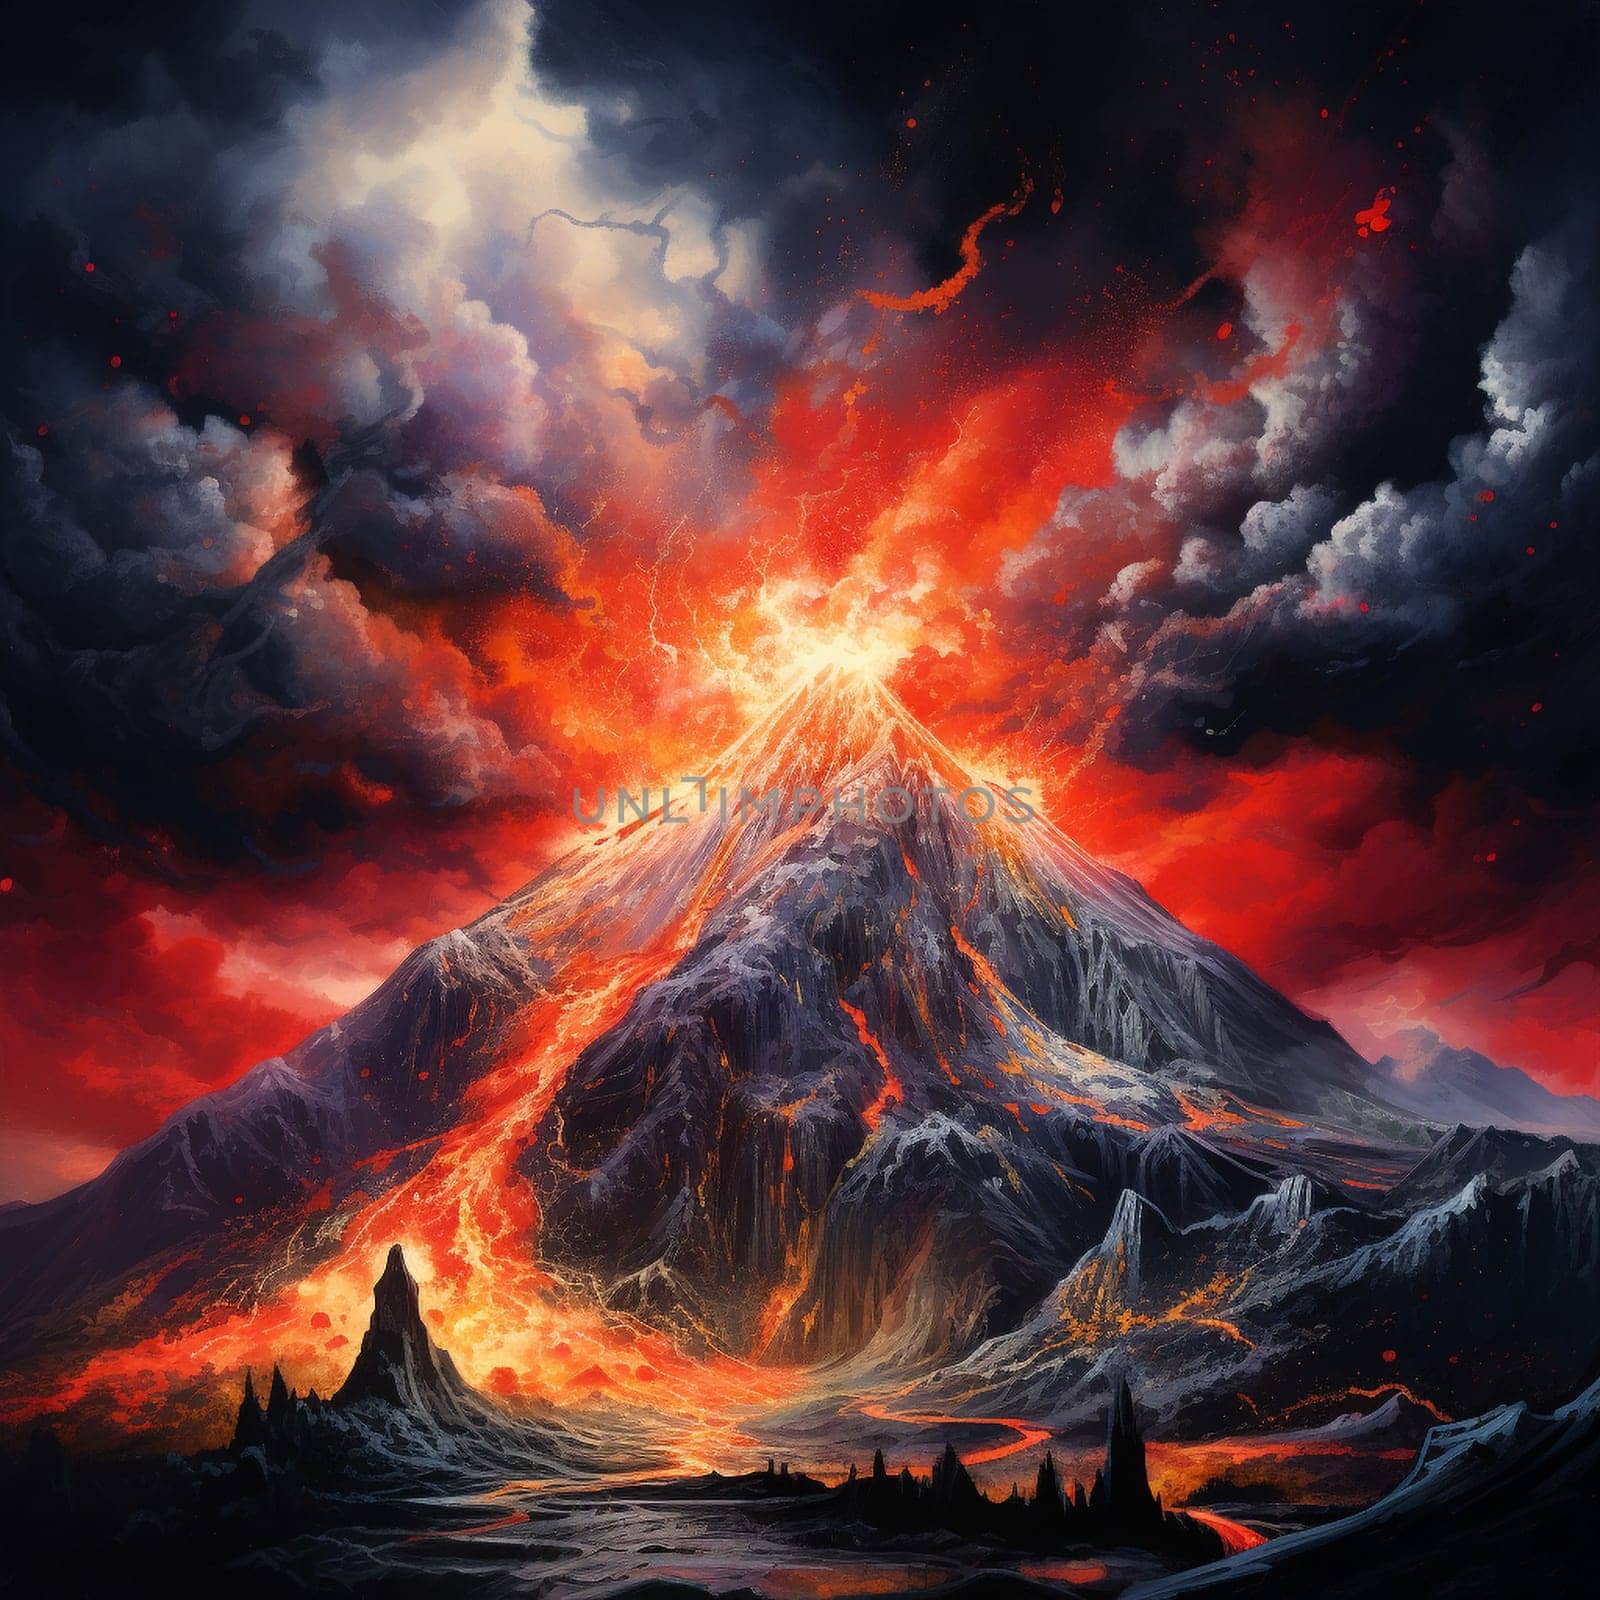 Be mesmerized by the breathtaking volcanic eruption in this vibrant and dynamic artwork. The scene captures the raw energy and destructive force of nature, with billowing smoke and ash, glowing hot lava cascading down the mountainside, and an intense fiery glow illuminating the night sky. The composition evokes a sense of awe and power, captivating viewers with its vivid depiction of the volcanic eruption.